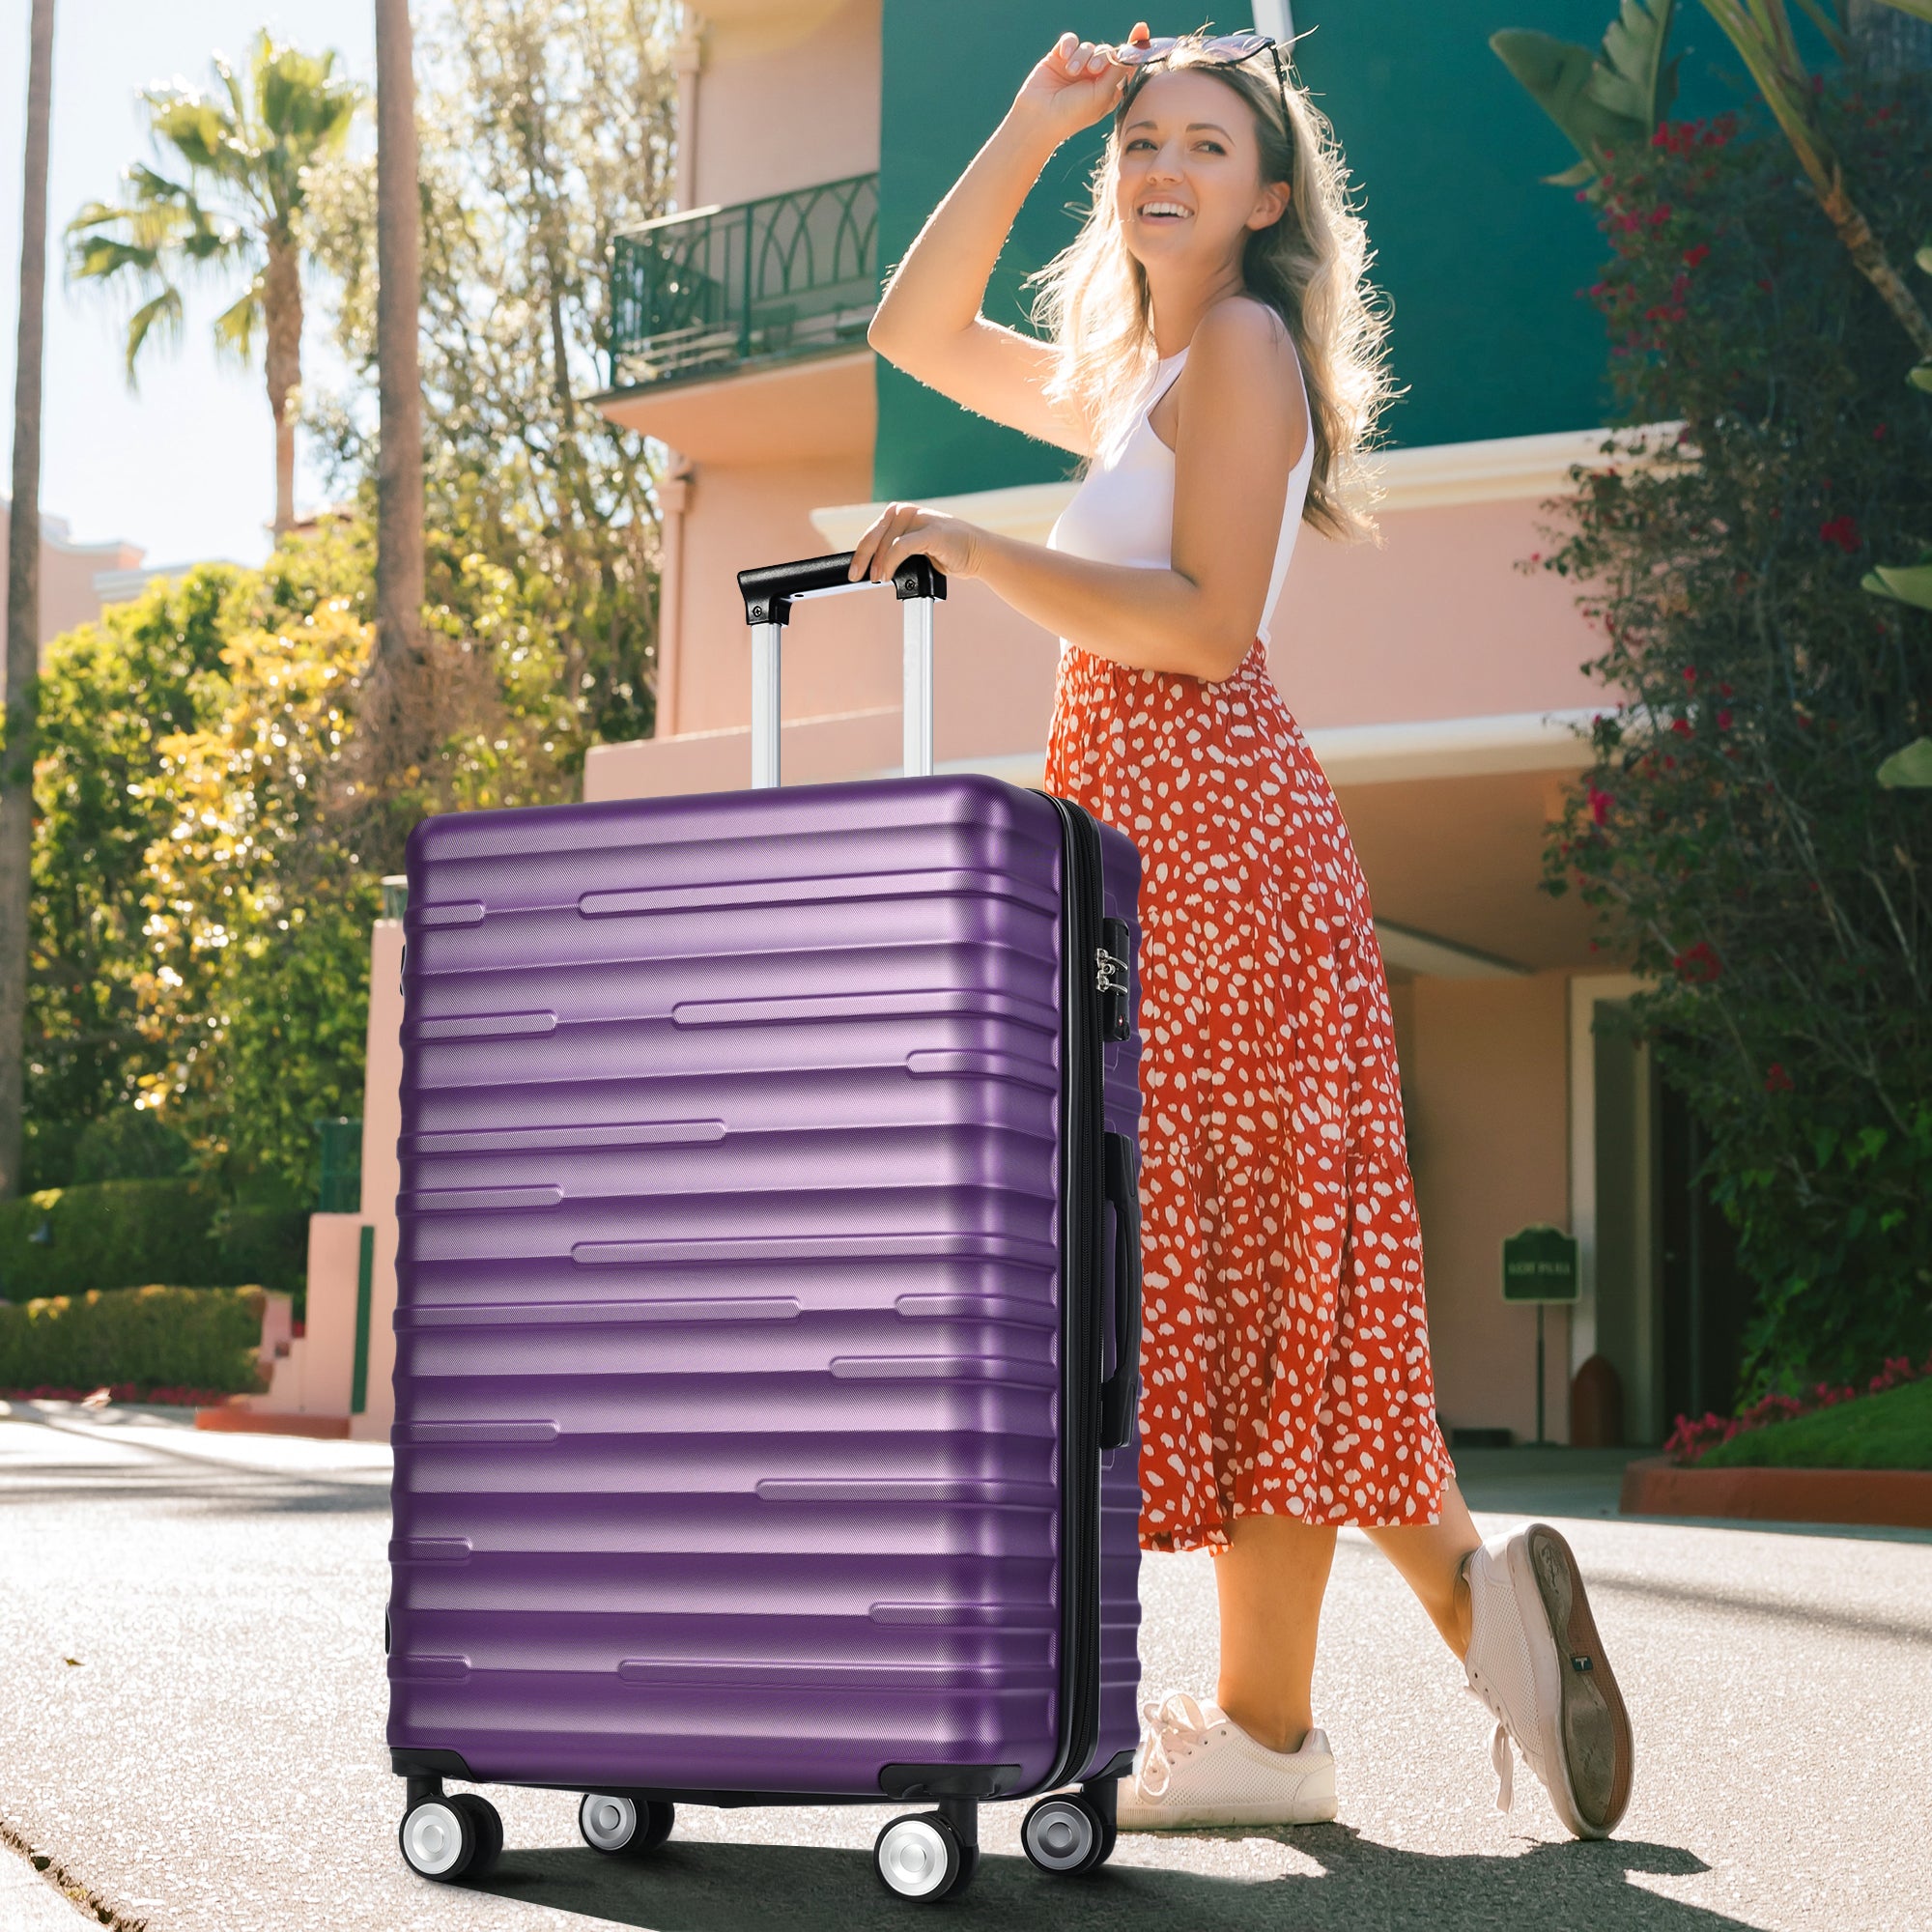 Luggage Expandable 3 Piece Sets ABS Spinner Suitcase purple-abs